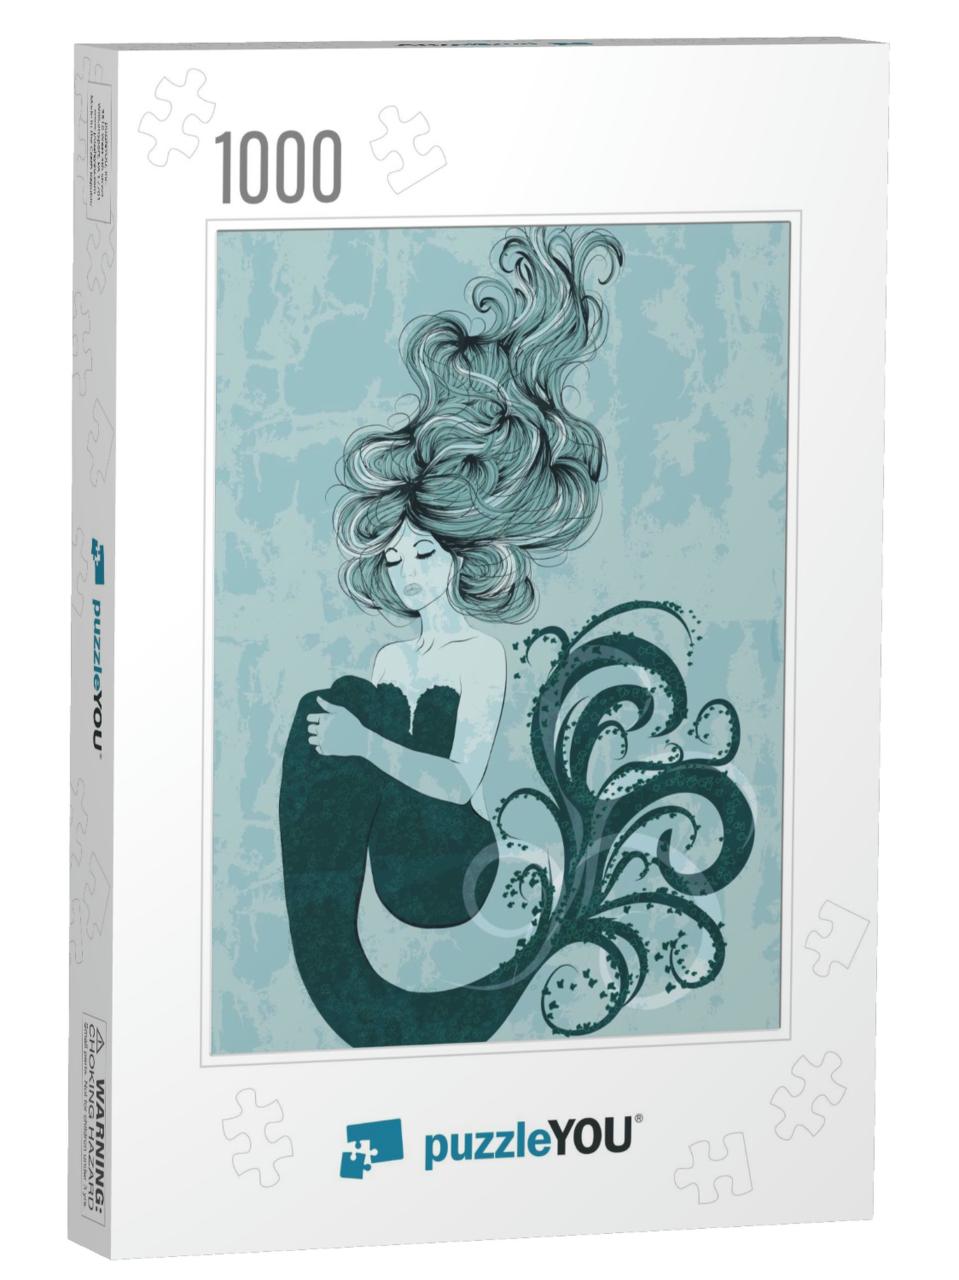 Illustration of Beautiful Mermaid with Long Hair... Jigsaw Puzzle with 1000 pieces